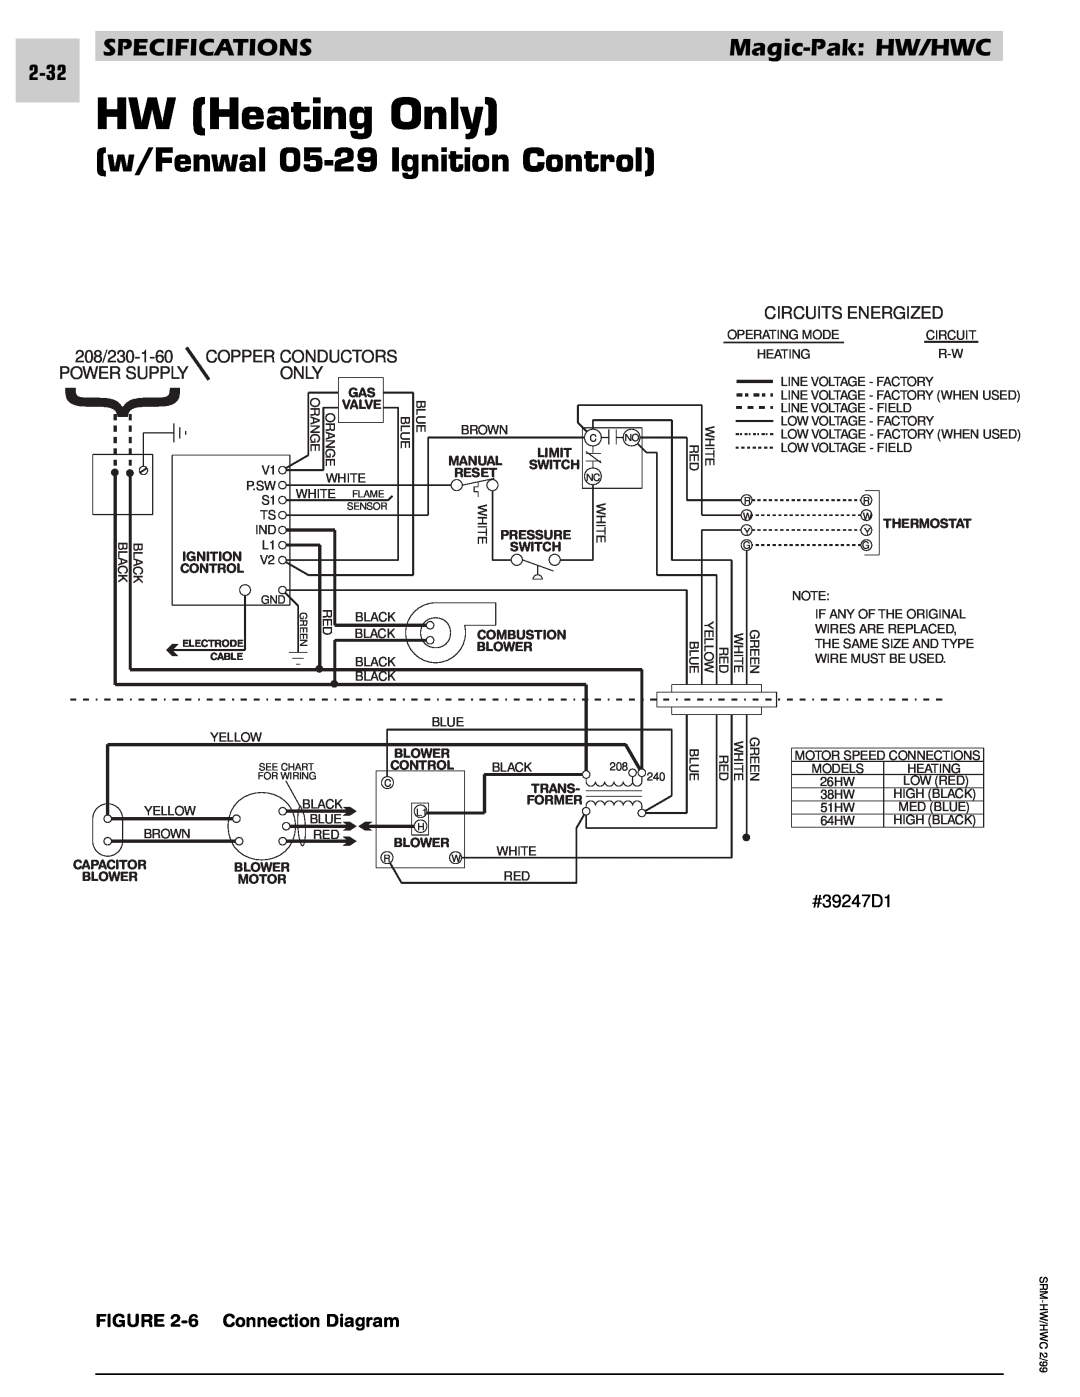 Armstrong World Industries 242, 243 HW Heating Only, w/Fenwal 05-29 Ignition Control, 6 Connection Diagram, Switch, Valve 